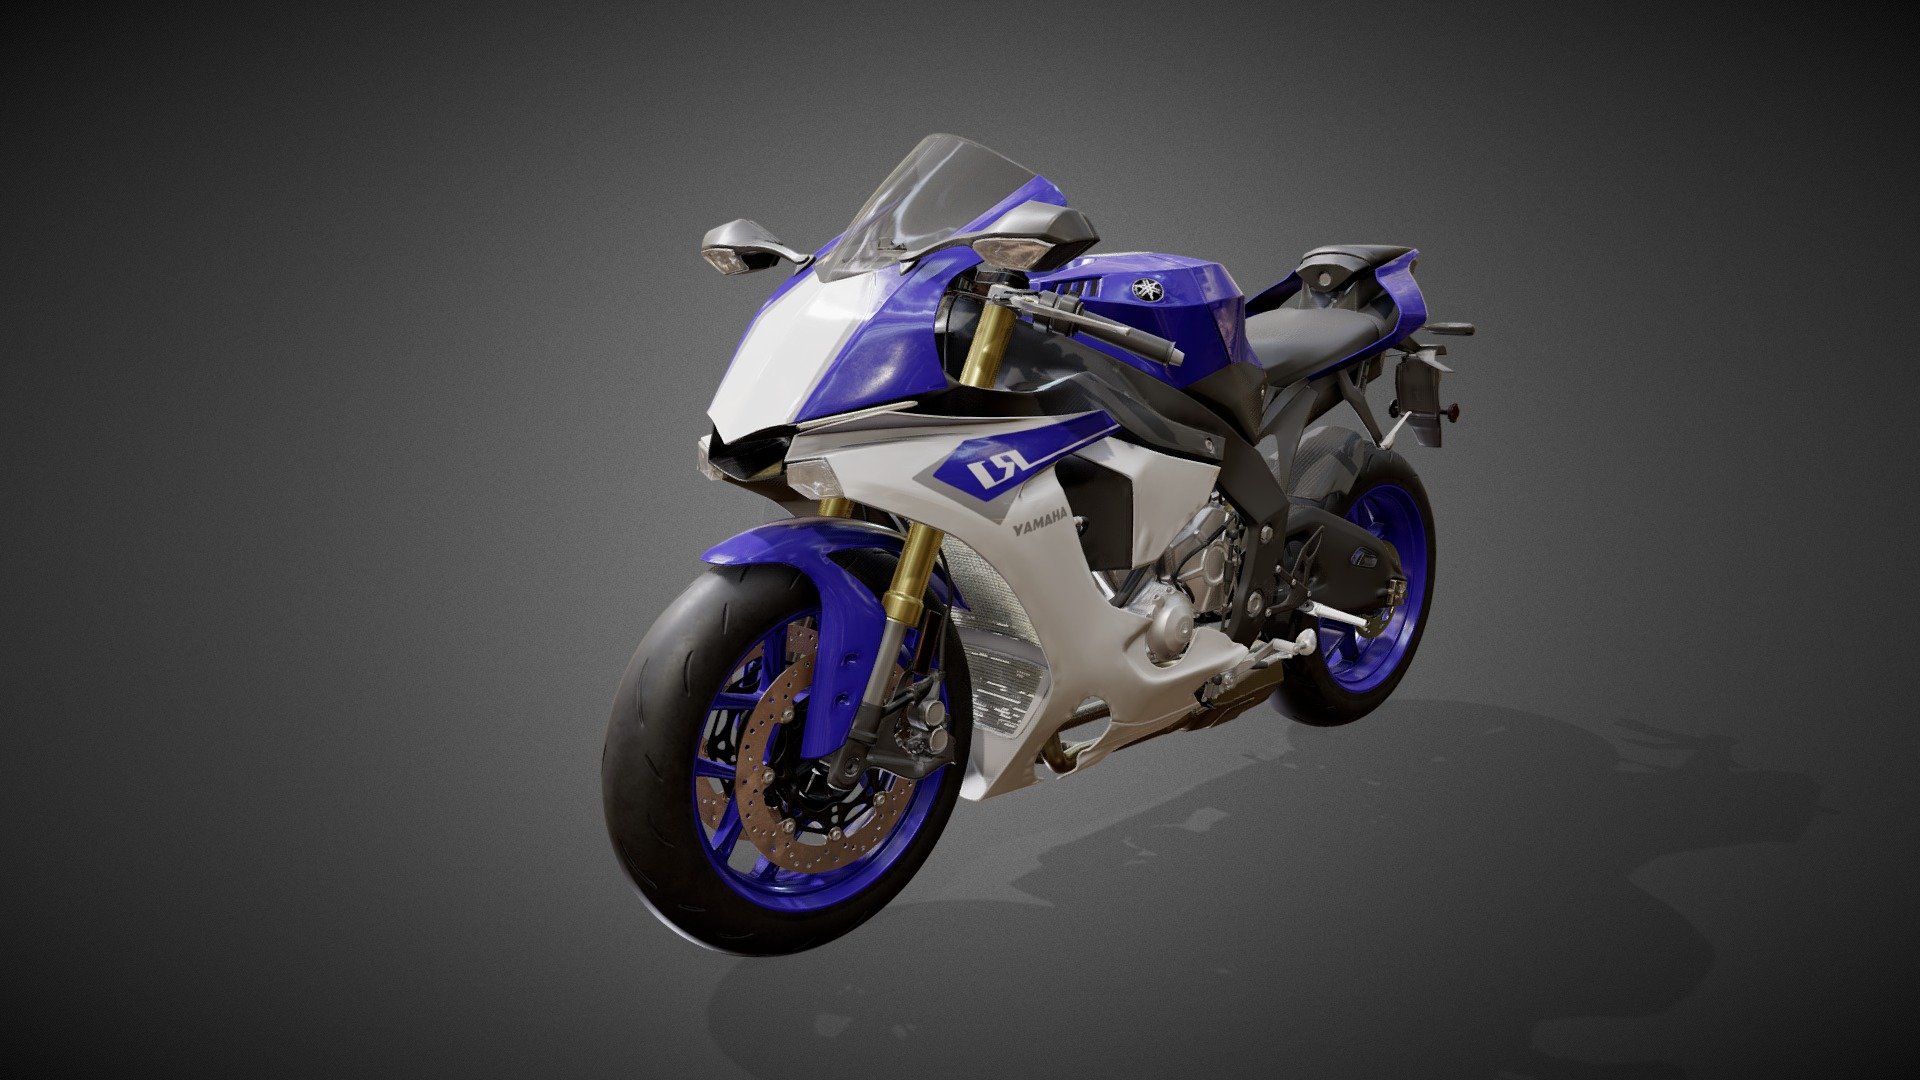 The Yamaha R1 Super sport Motorcycle 2015-2021 variant 3D model is a stunning representation of one of Yamaha's most iconic and high-performance motorcycles.

The 3D model is highly detailed and features a realistic rendering baked on a low poly model, engine, wheels, and other components made up of hundreds of thousands of polygons that were all manually placed.

Users can easily manipulate the 3D model using the rig attached in .blend and .fbx file format along with two complex .obj files containing the original detailed model.


Made out of 250+ unique pieces in high detail to then be baked on a low poly model, which can be used in animation, games and renders cheaply.


Included files:
1-  Blend and Fbx files containing the rigged model and three animation variants
2-  The complex model as an obj file and is also fragmented into pieces 
3-  texture exported directly from Substance Painter.

Hope you enjoy it 😊 - Yamaha R1 Supersport Motorcycle - Buy Royalty Free 3D model by Sam_Kasrawi 3d model